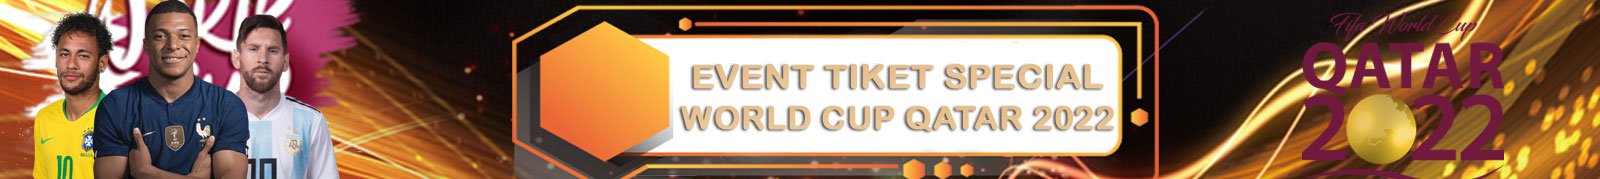 Event Tiket Special World Cup Qatar 2022